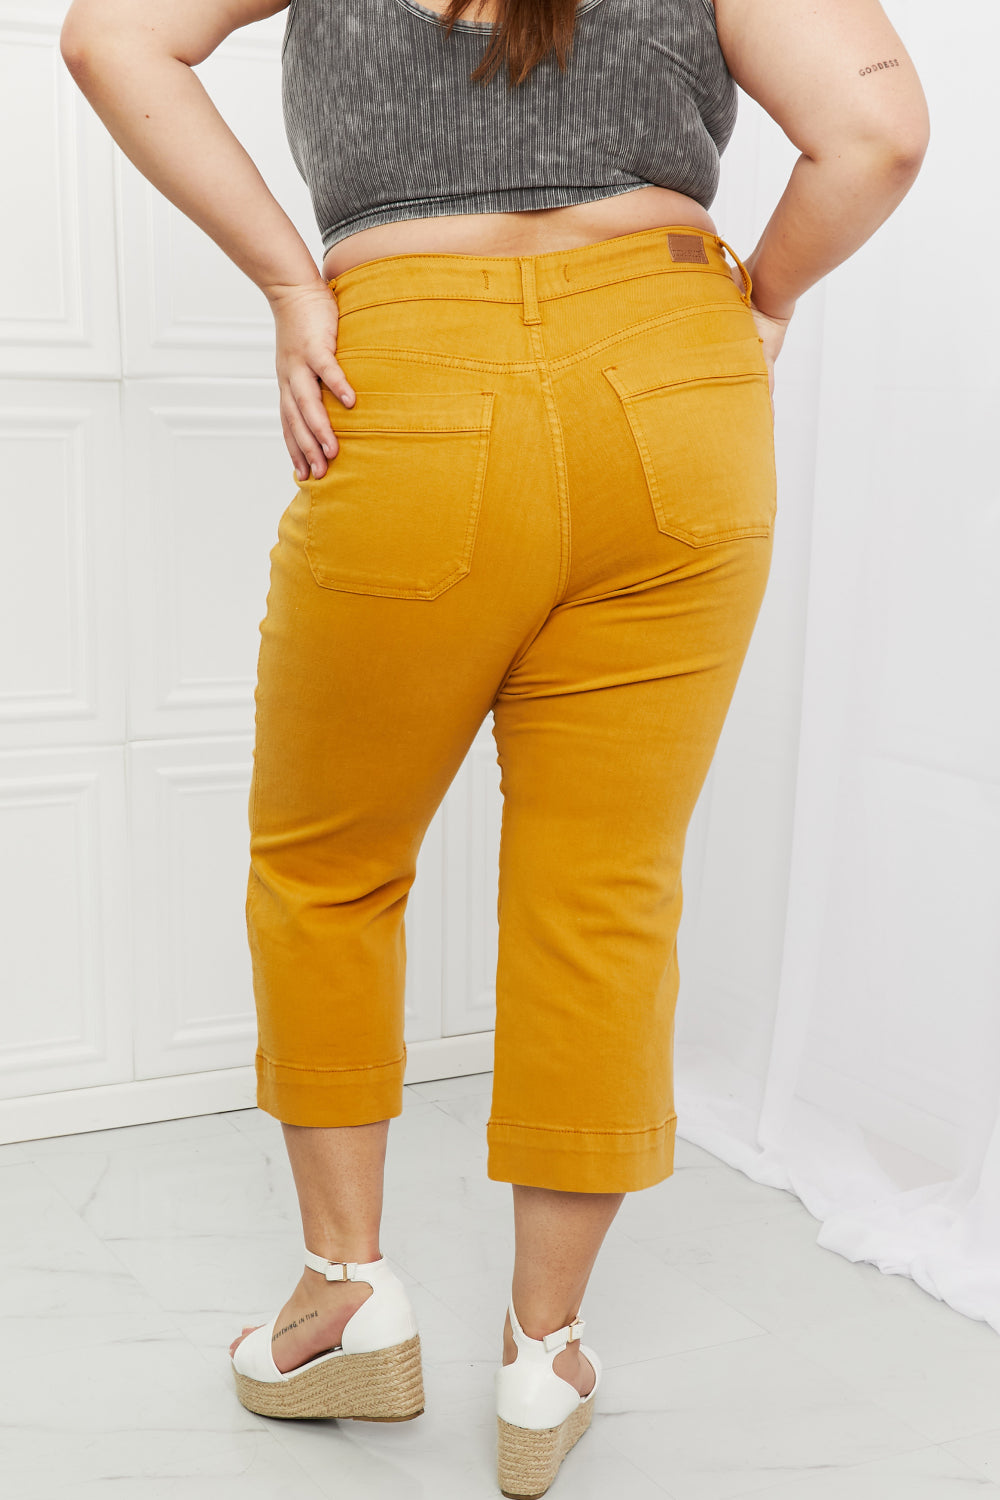 Judy Blue Straight Leg Cropped Jeans* - AnnRose Boutique